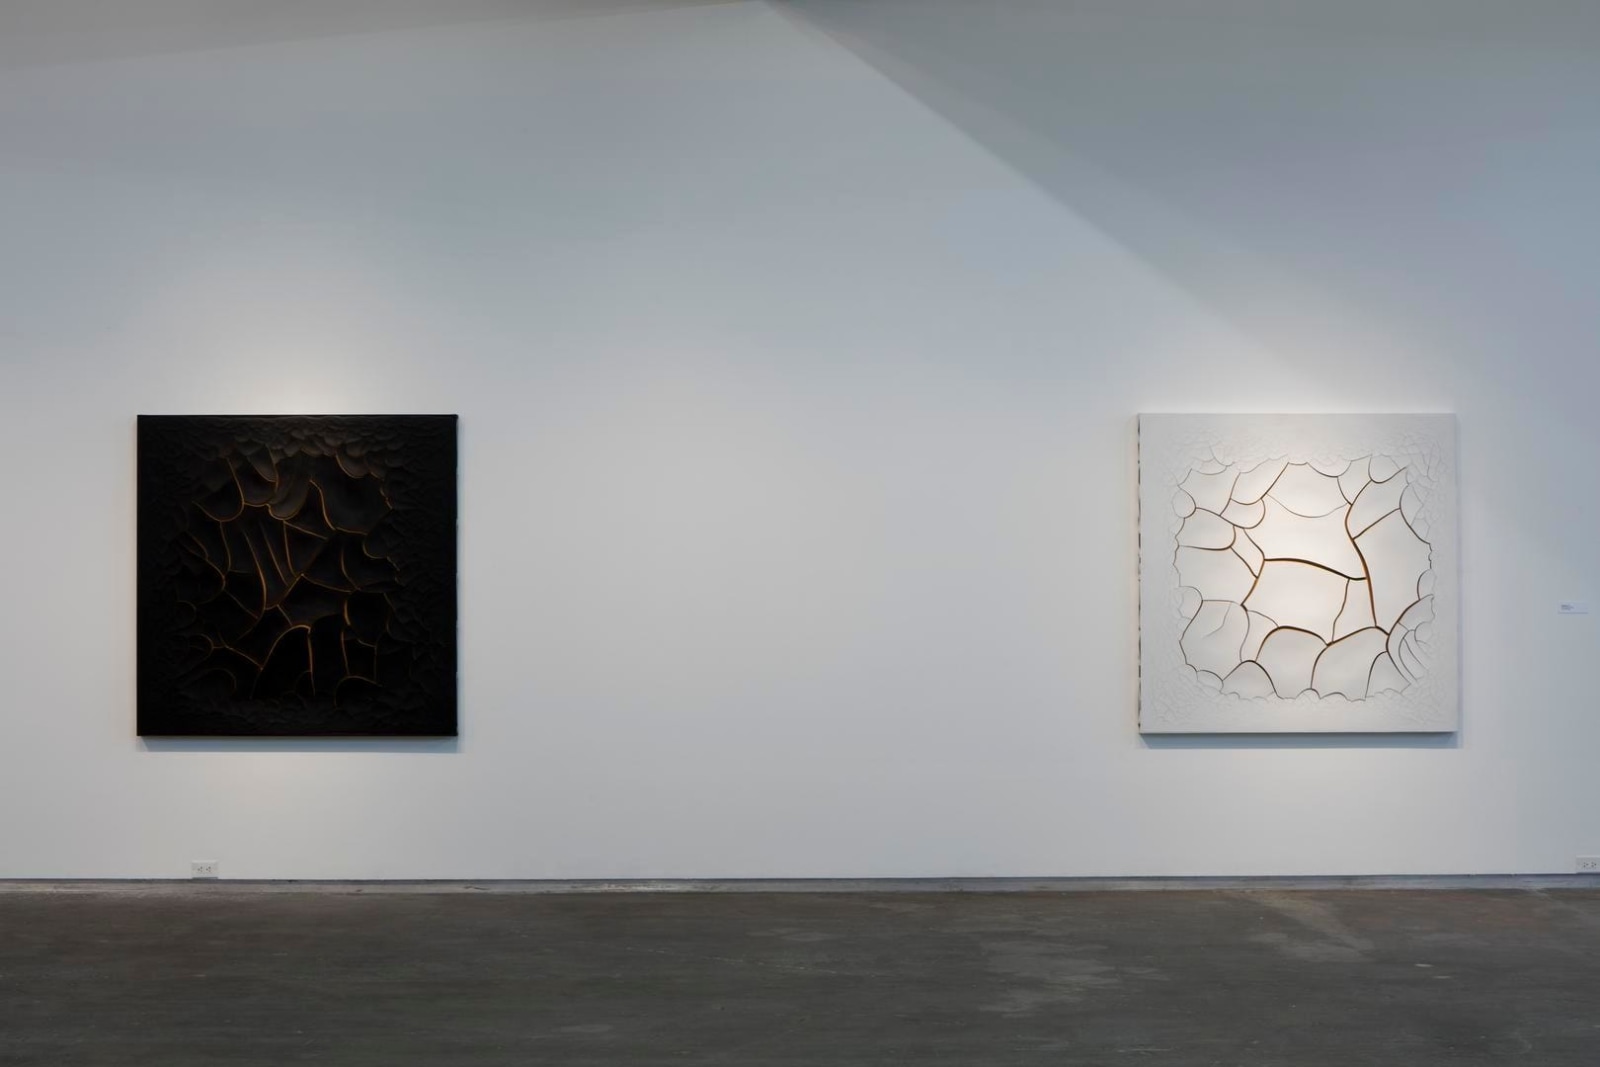  Photo: Kevin Todora. Courtesy the artist, Dallas Contemporary, Lehmann Maupin, New York and Hong Kong, and Galeria Fortes Vila&ccedil;a